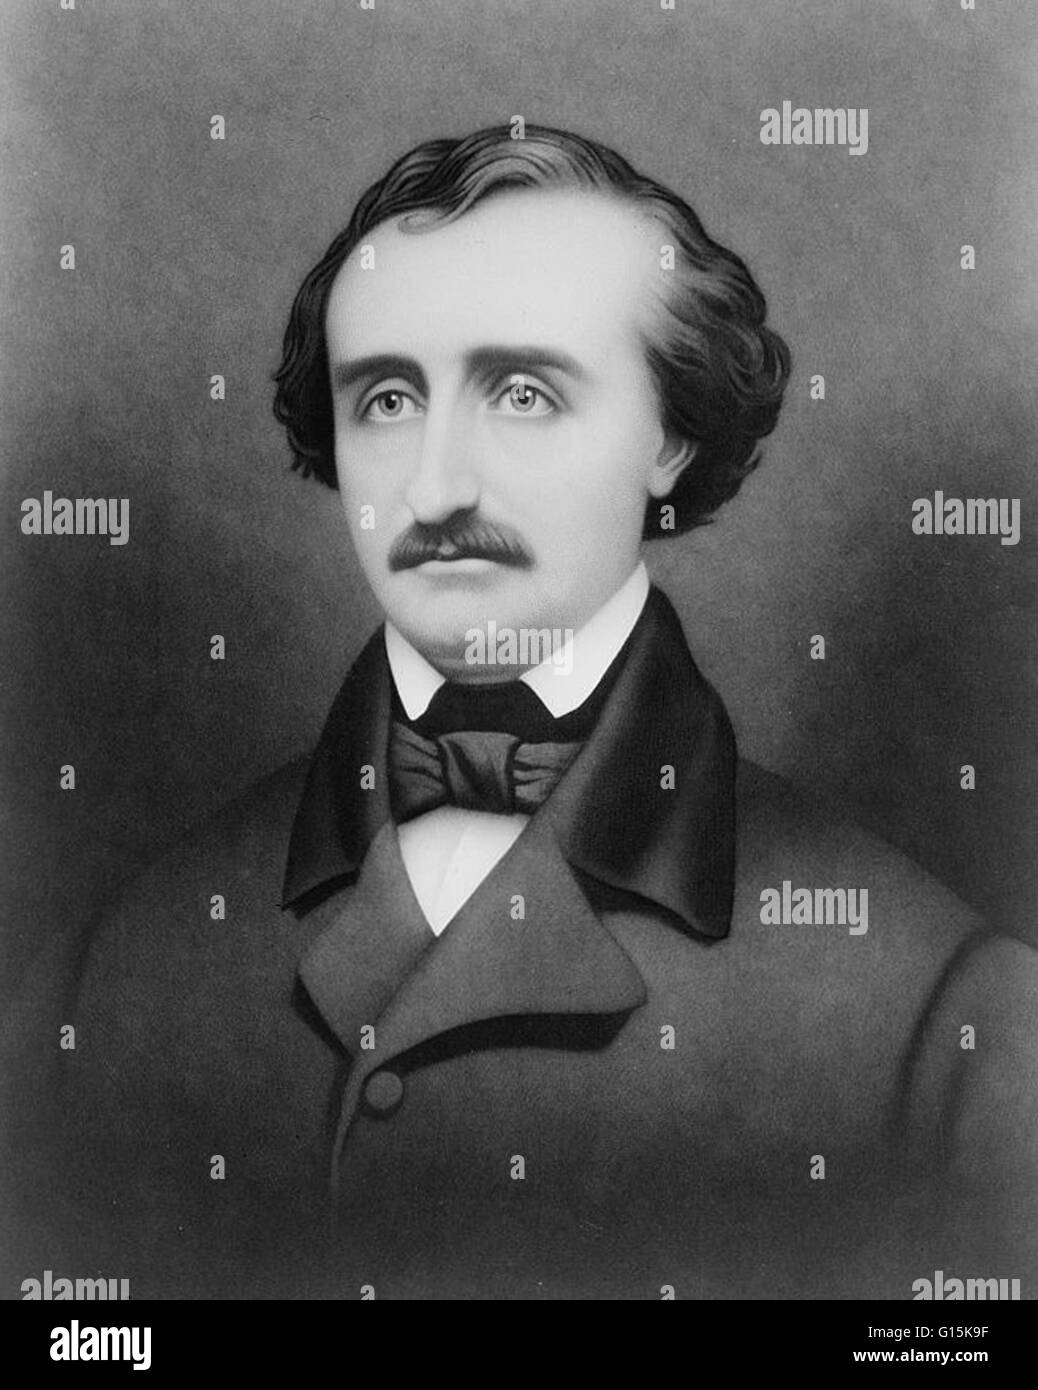 Edgar Allan Poe (1809-1849) was an American author, poet, editor and literary critic, considered part of the American Romantic Movement. Best known for his tales of mystery and the macabre, Poe was one of the earliest American practitioners of the short s Stock Photo